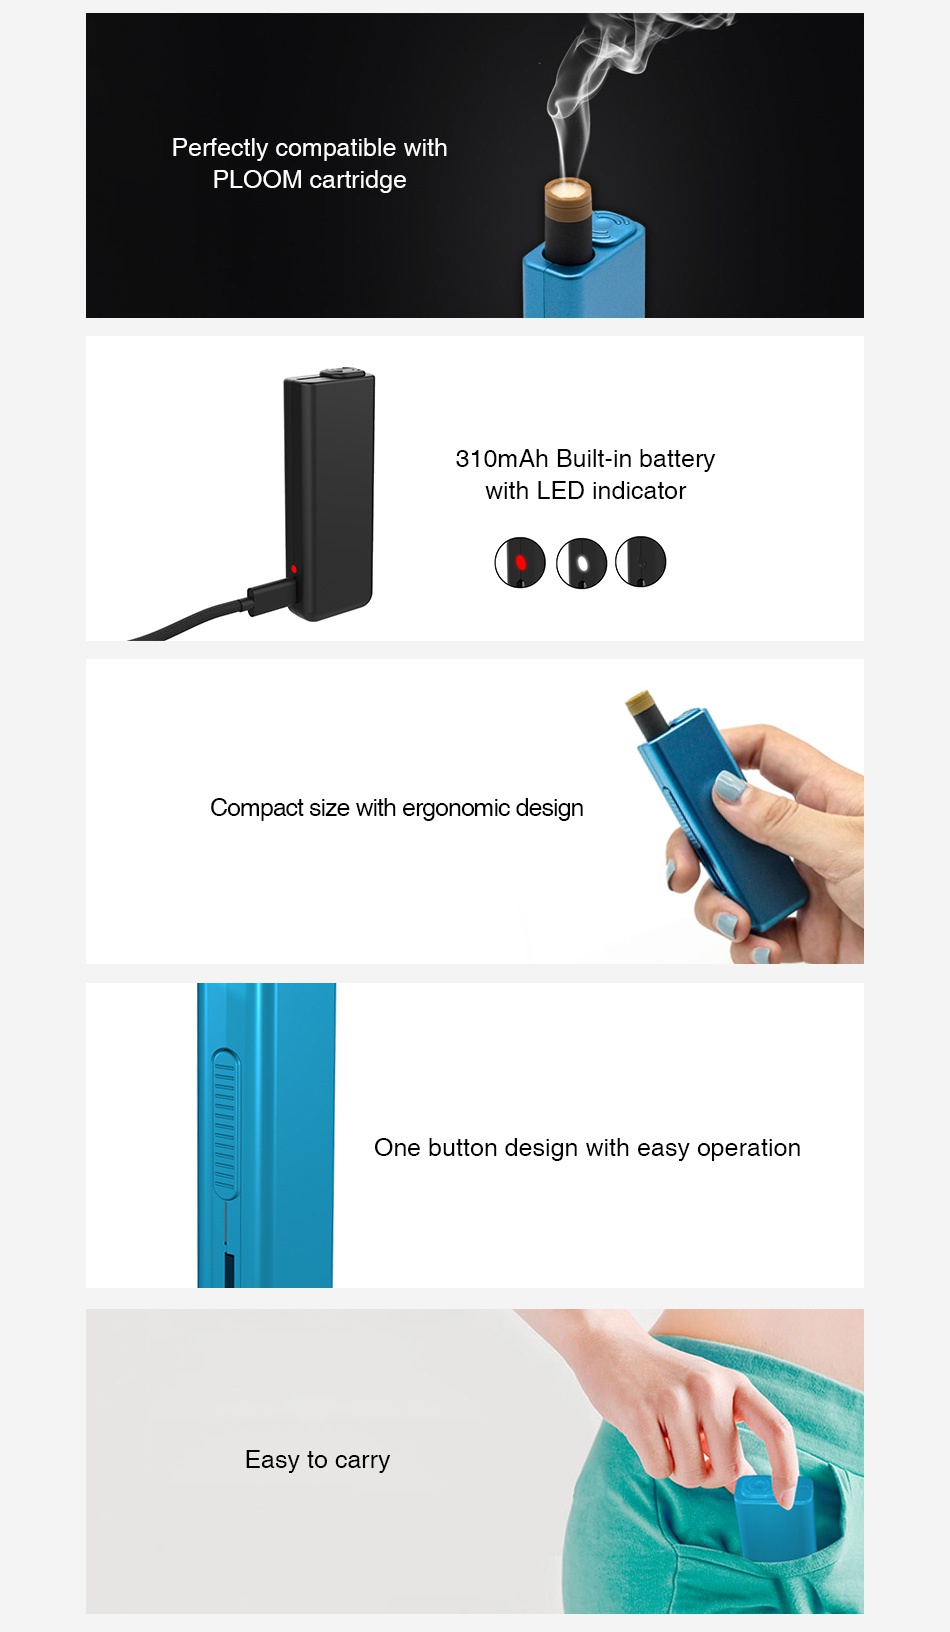 Kamry Ploobox Heating Kit 310mAh Perfectly compatible with PLOOM cartridge 310mAh Built in battery With led indicator Compact size with ergonomic design One button design with easy operation Easy to carry